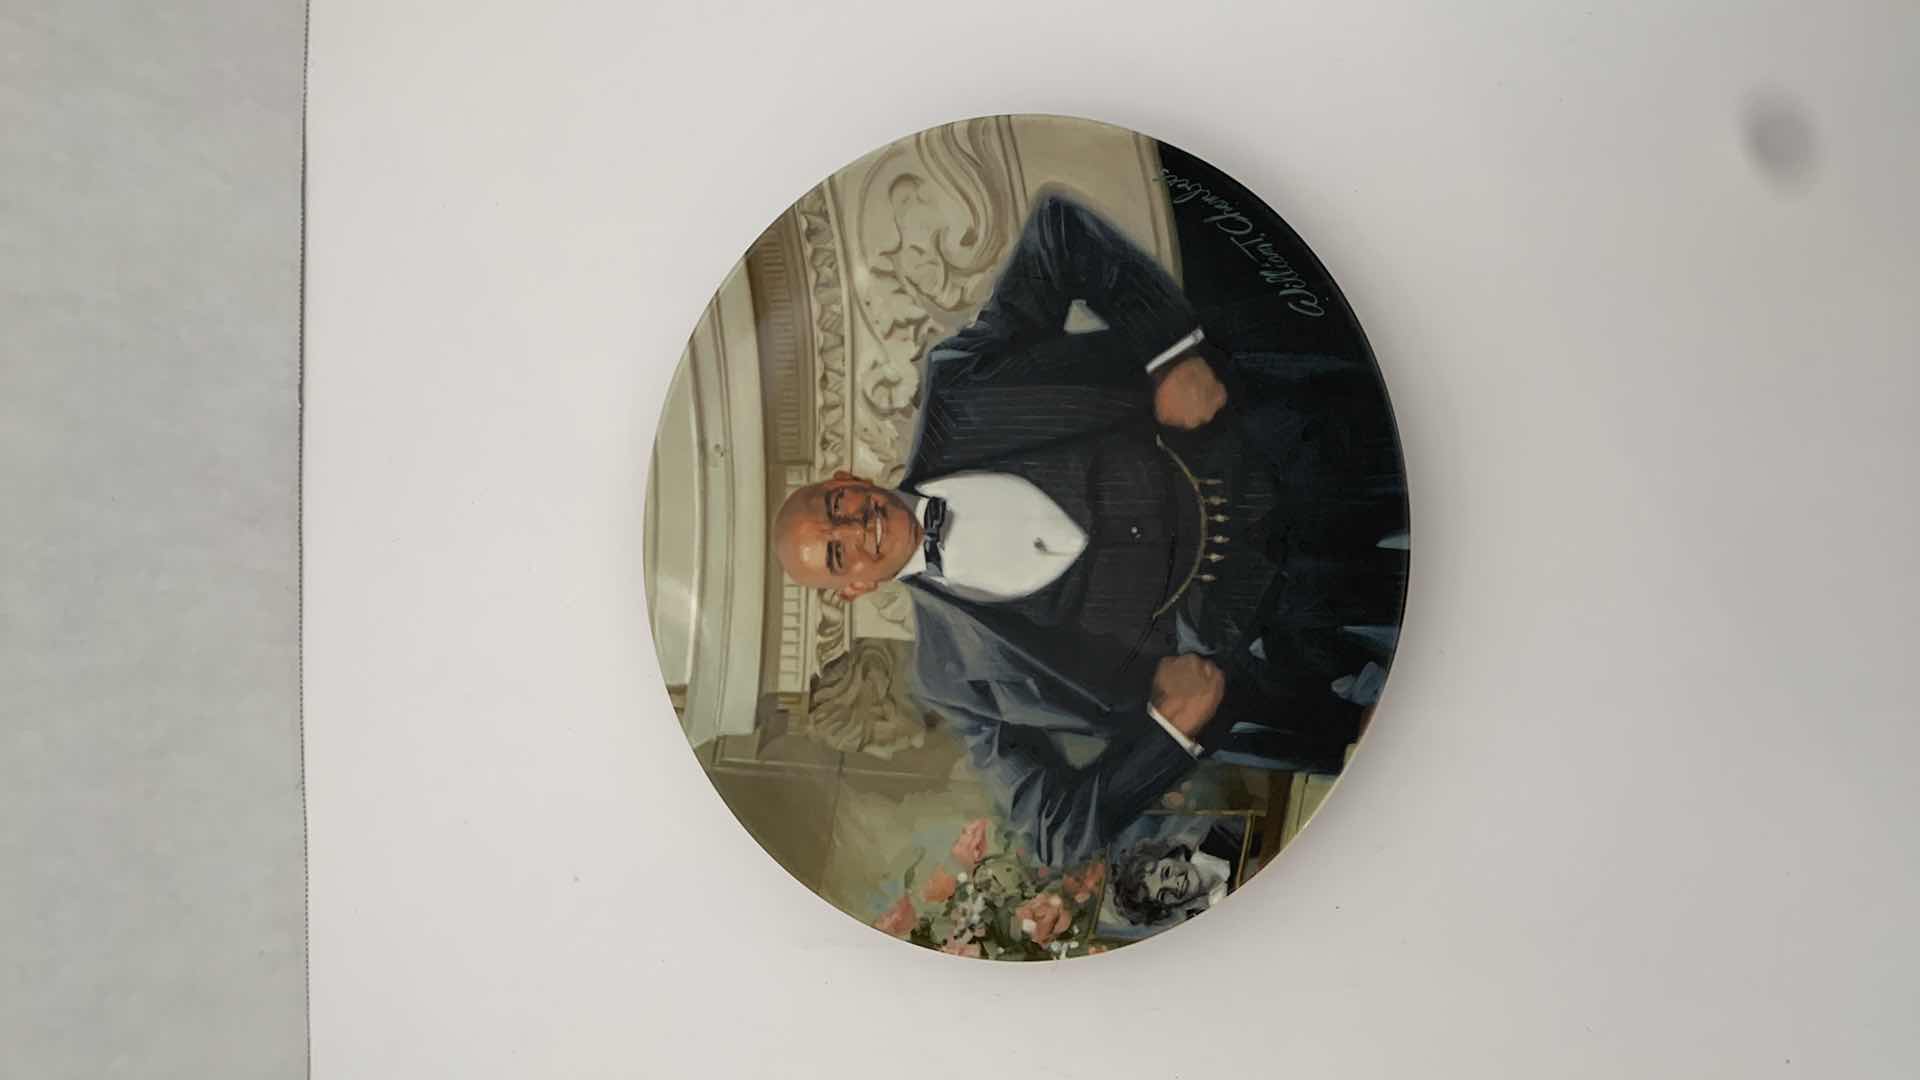 Photo 1 of WILLIAM CHAMBERS “DADDY WARBUCKS” PLATE 9” WIDE